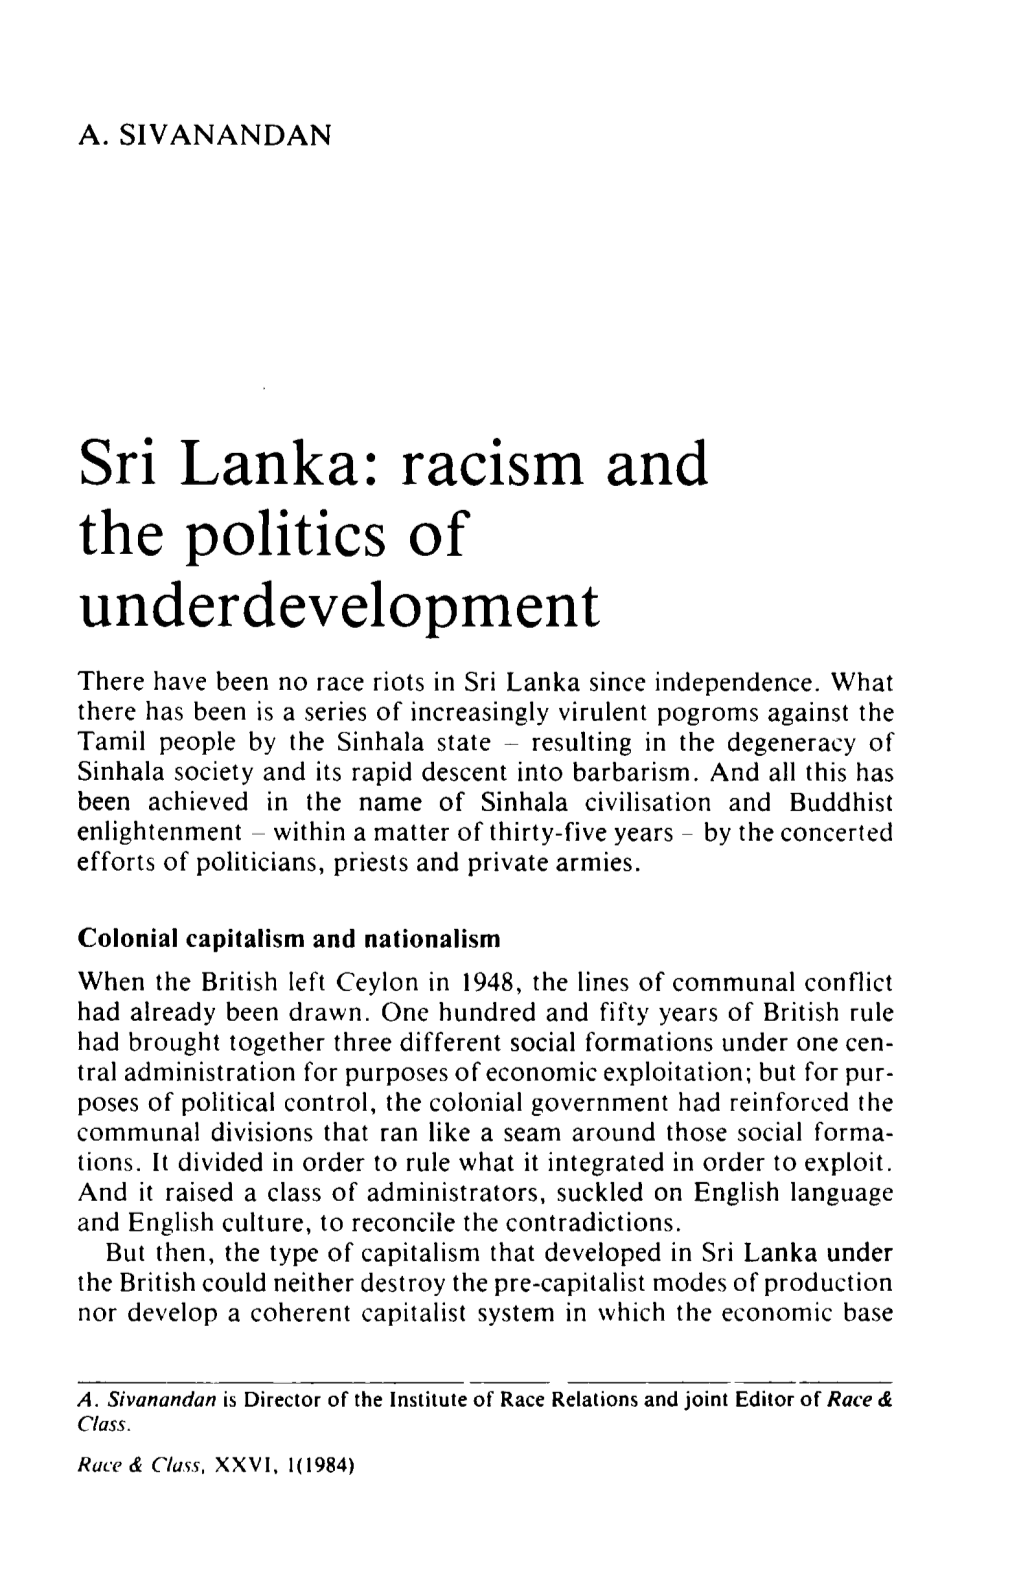 Racism and the Politics of Underdevelopment